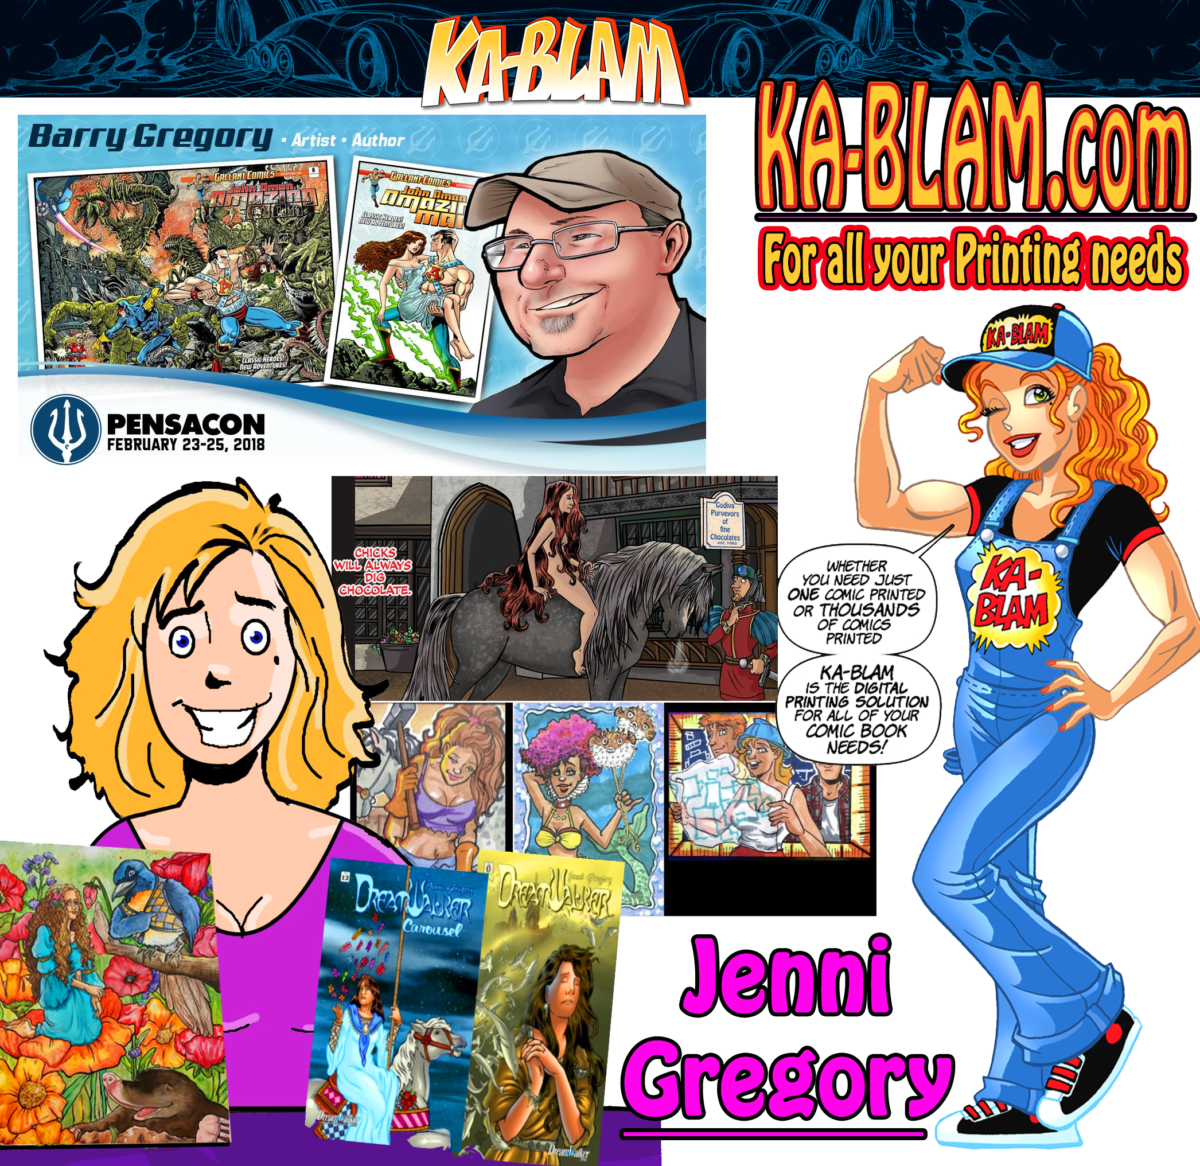 COMIC CON HIGHWAY FLORIDA EXIT:-Pensacola- Jenni and Barry Gregory will be at PENSACON